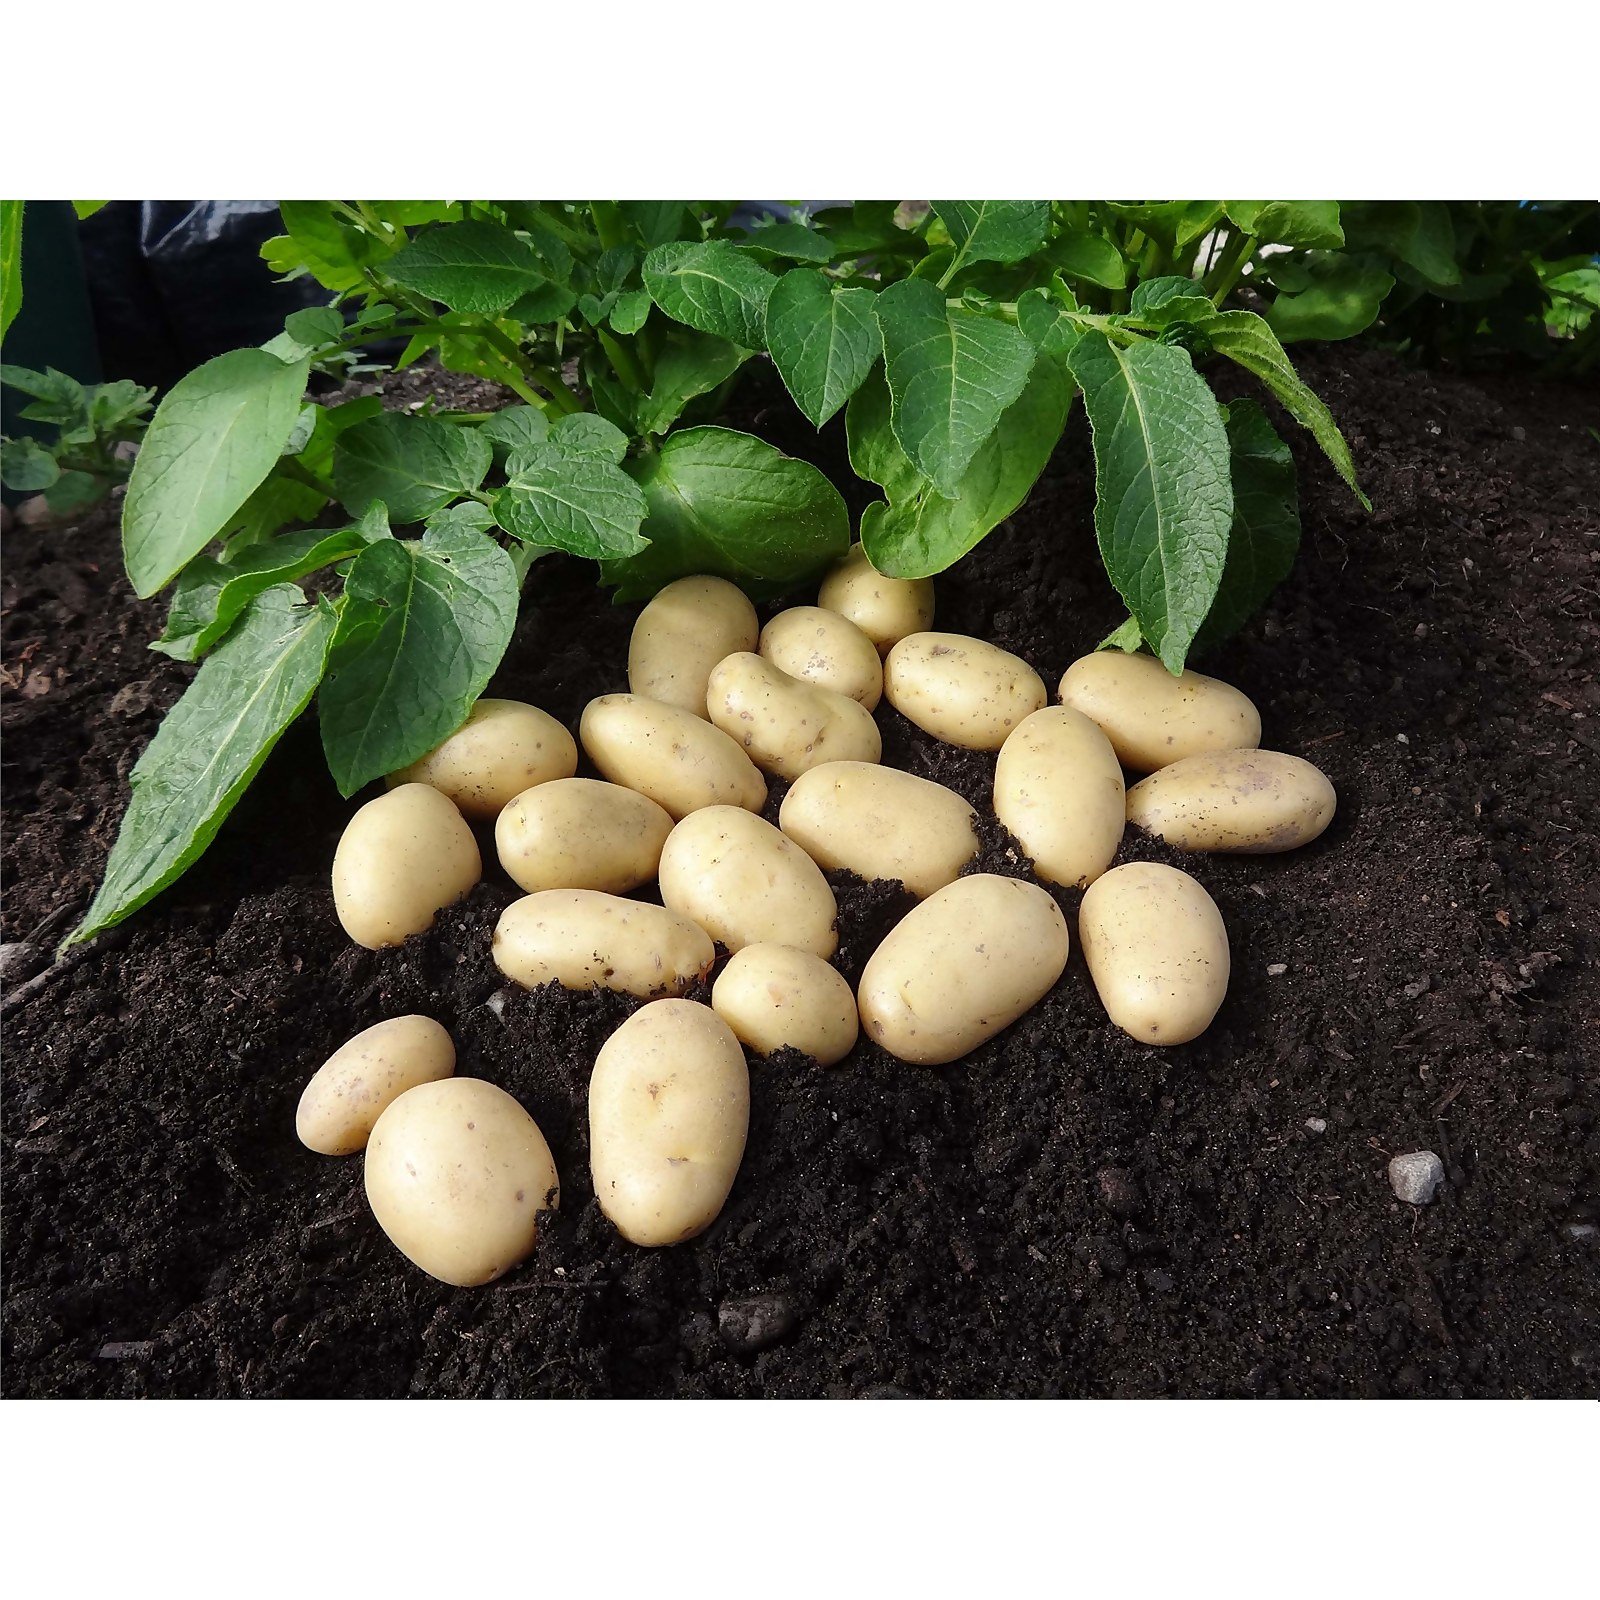 grow your own potatoes